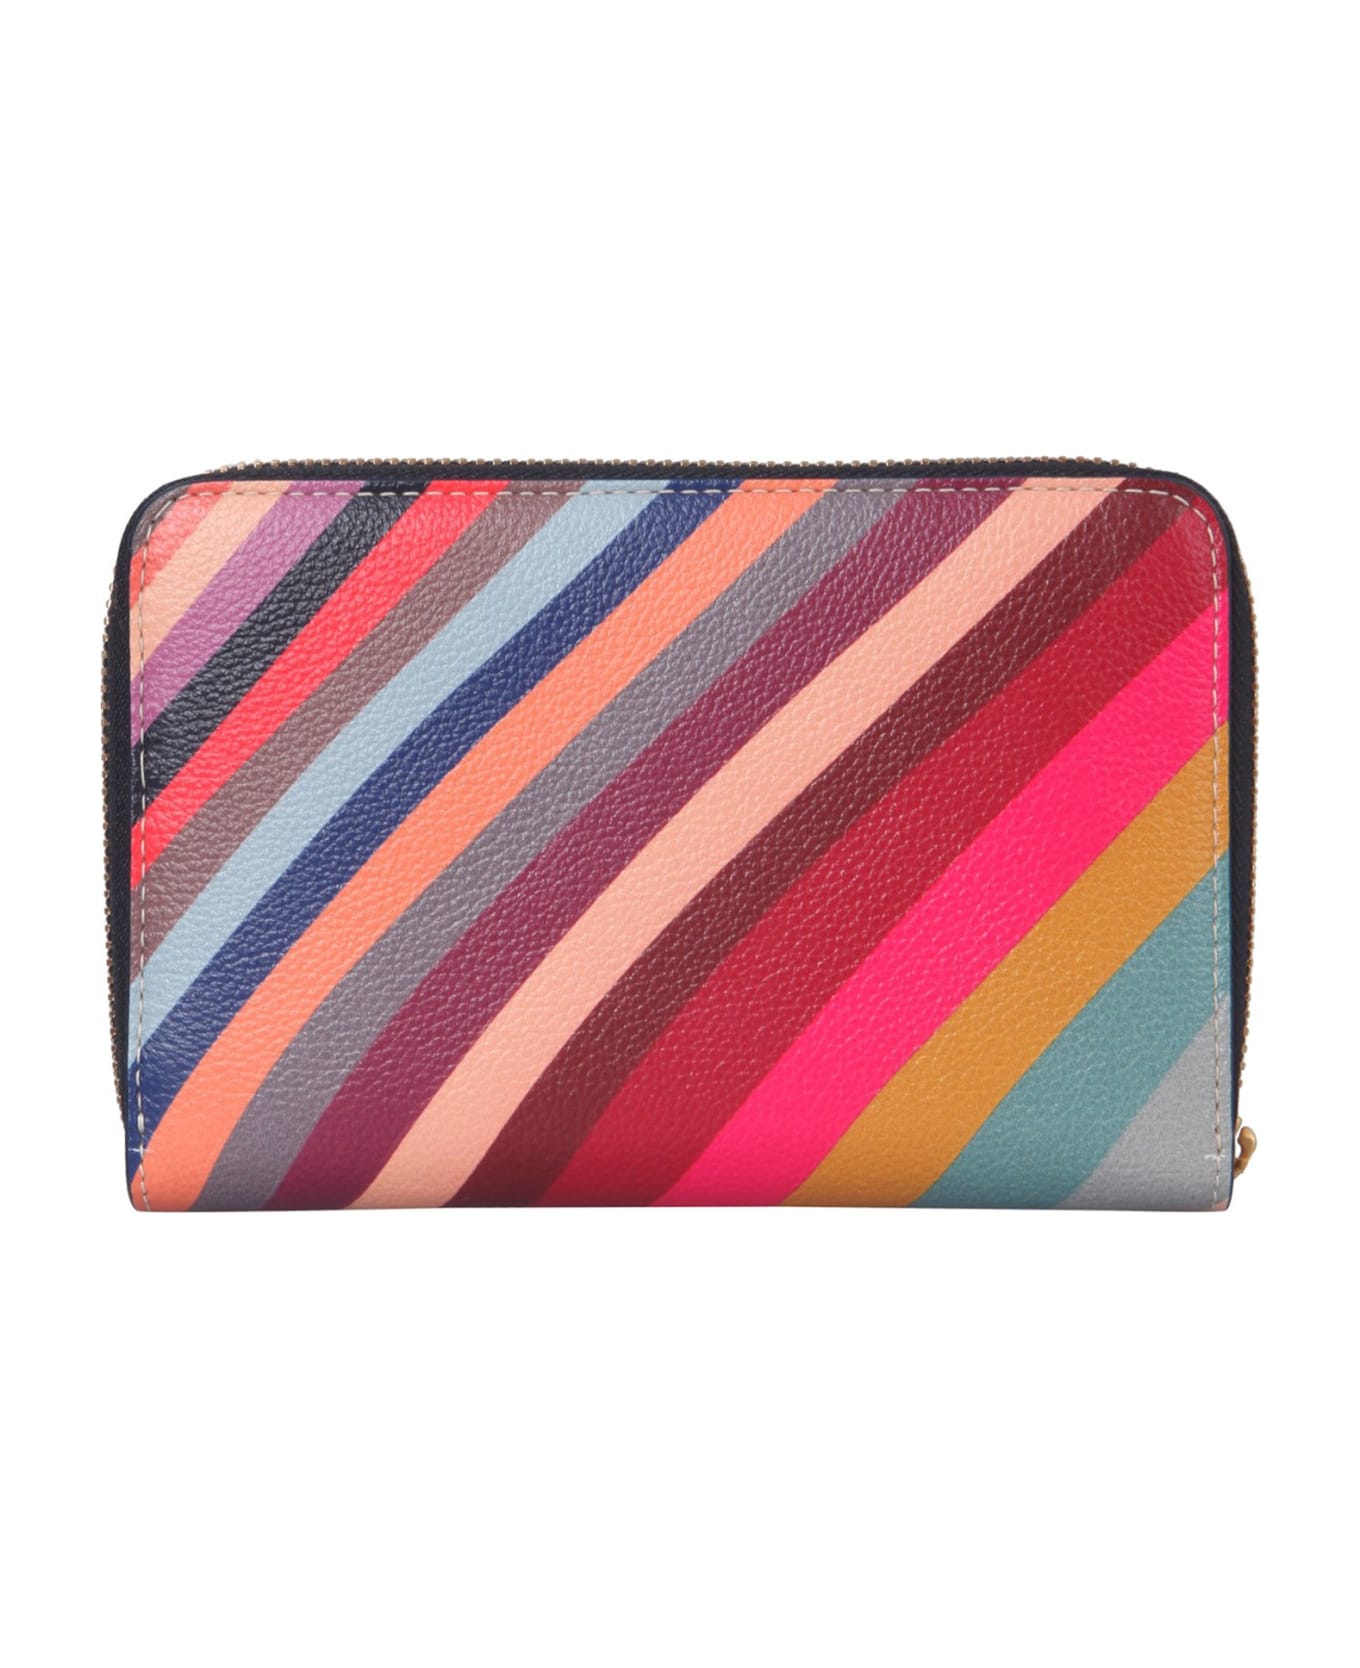 Paul Smith Leather Wallet - MULTICOLOR